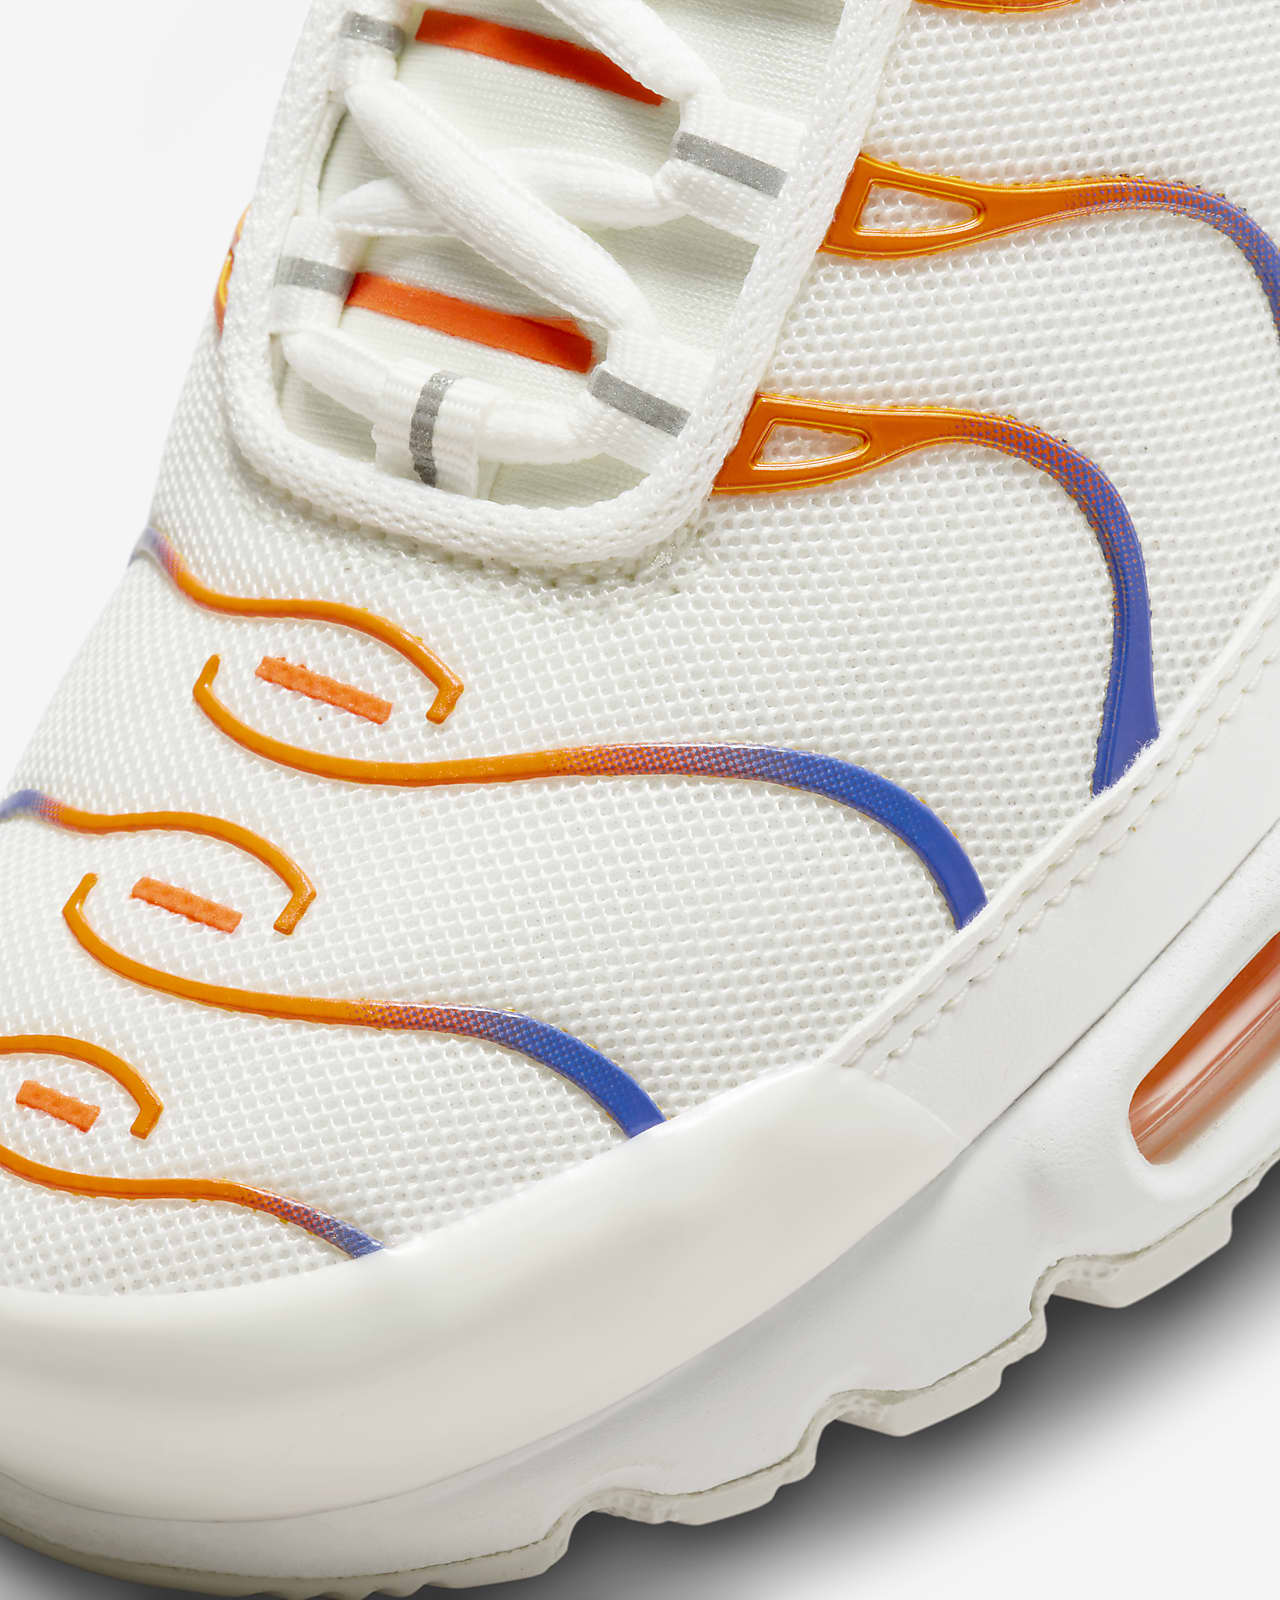 New NIKE Air Max Plus TN classic Men's Athletic Sneakers white all sizes